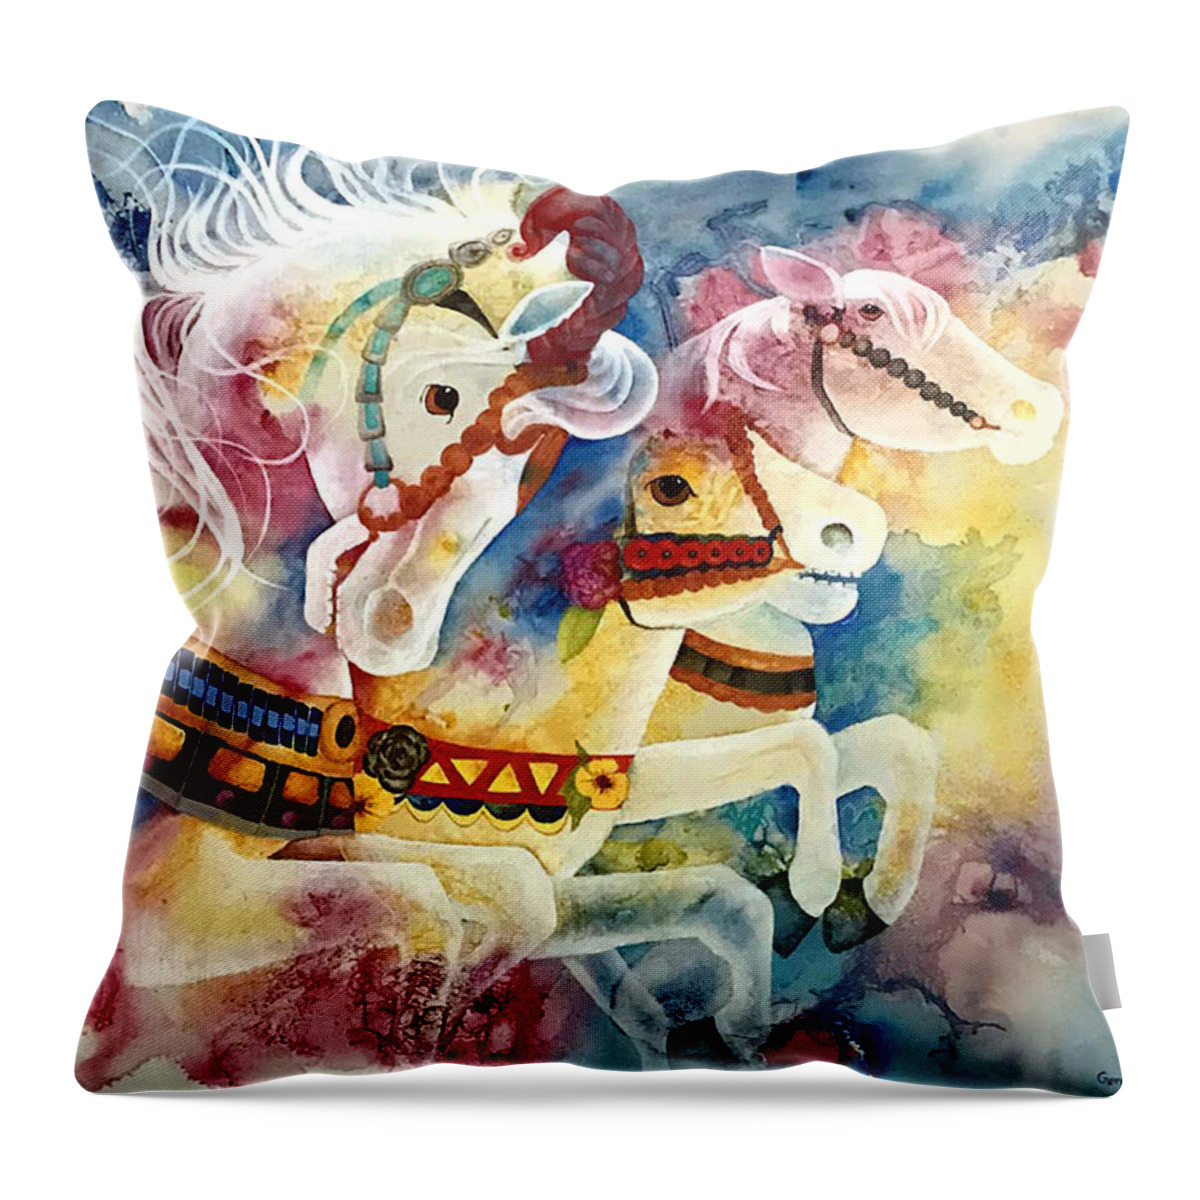 Watercolor Throw Pillow featuring the painting Carousel Horses by Gerry Delongchamp